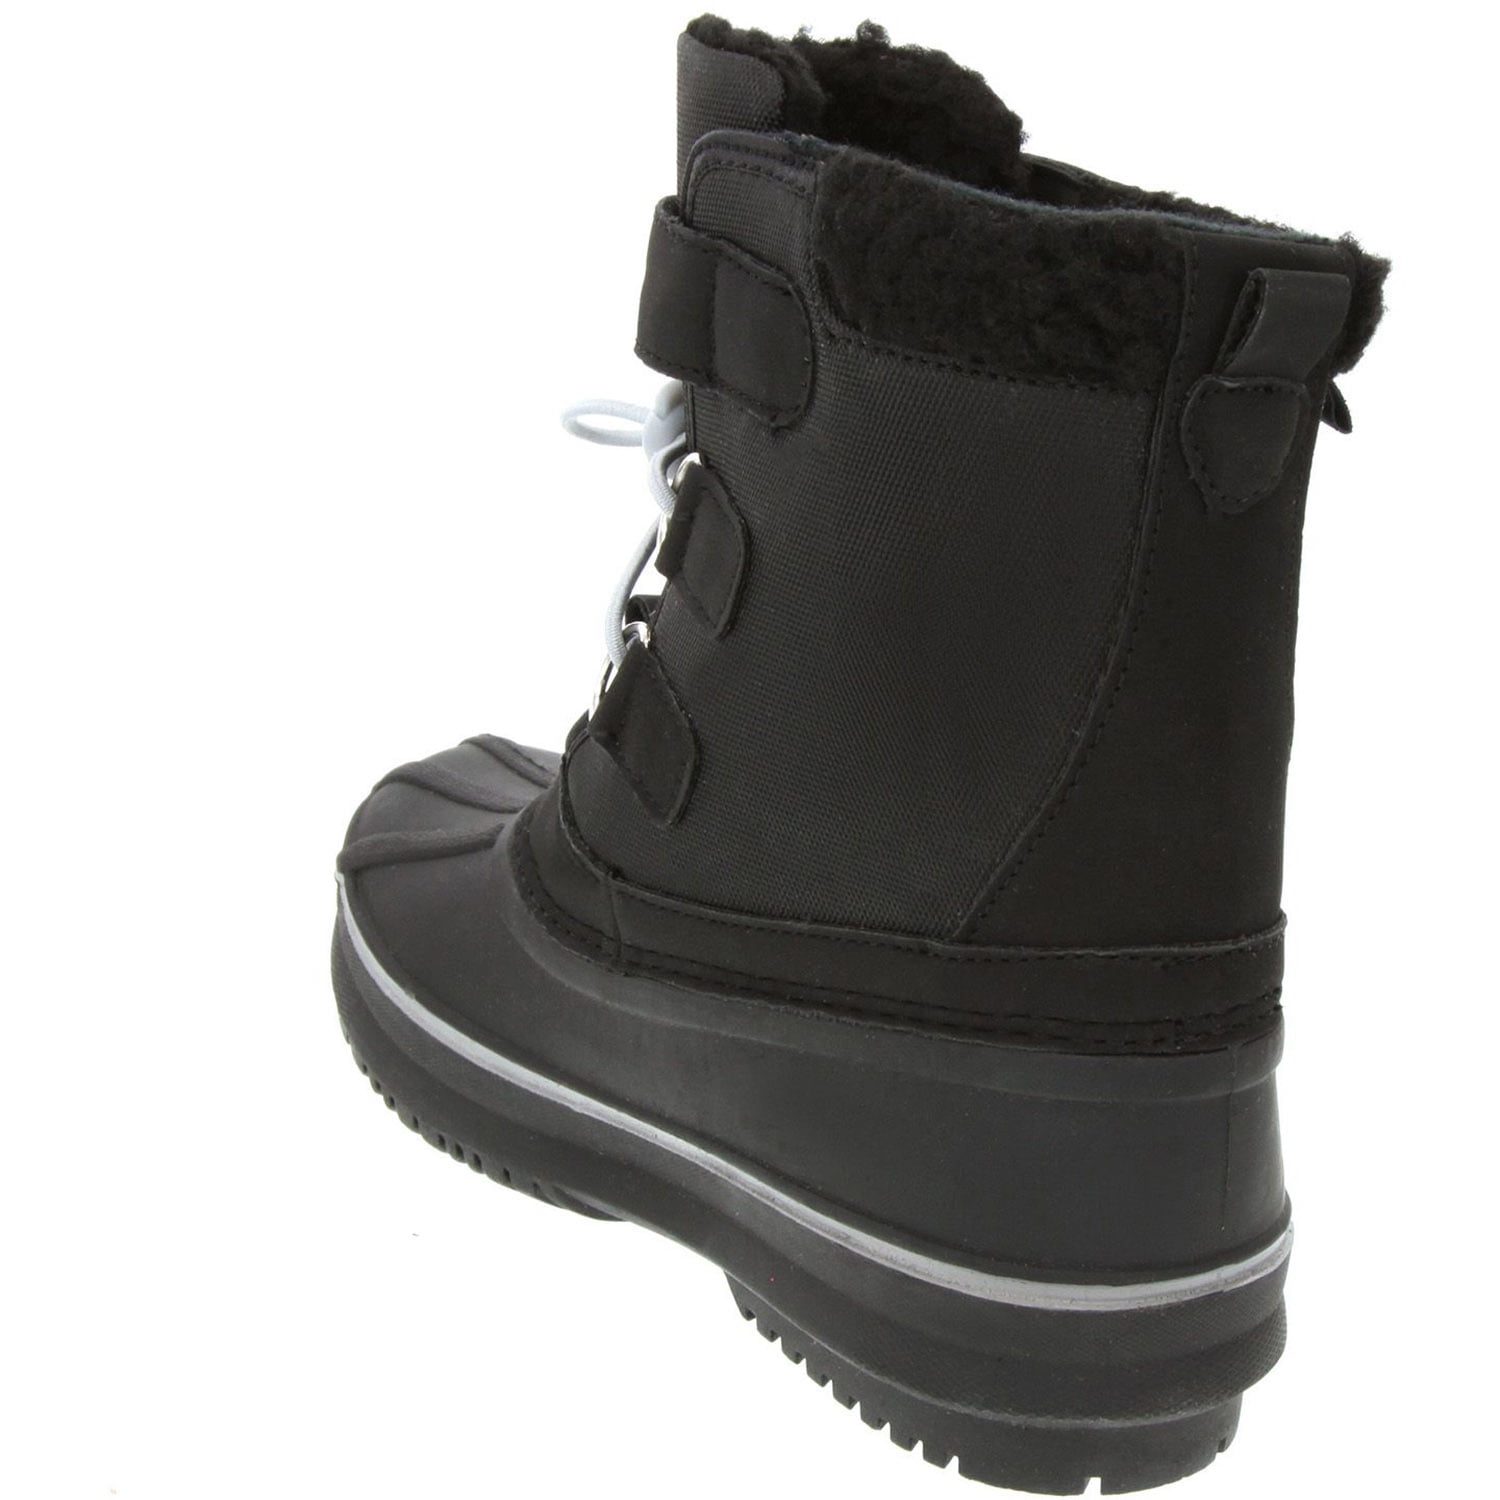 Ankle High Non-Slip Snow Boots London Fog Boys Totty Velcro & Lace 